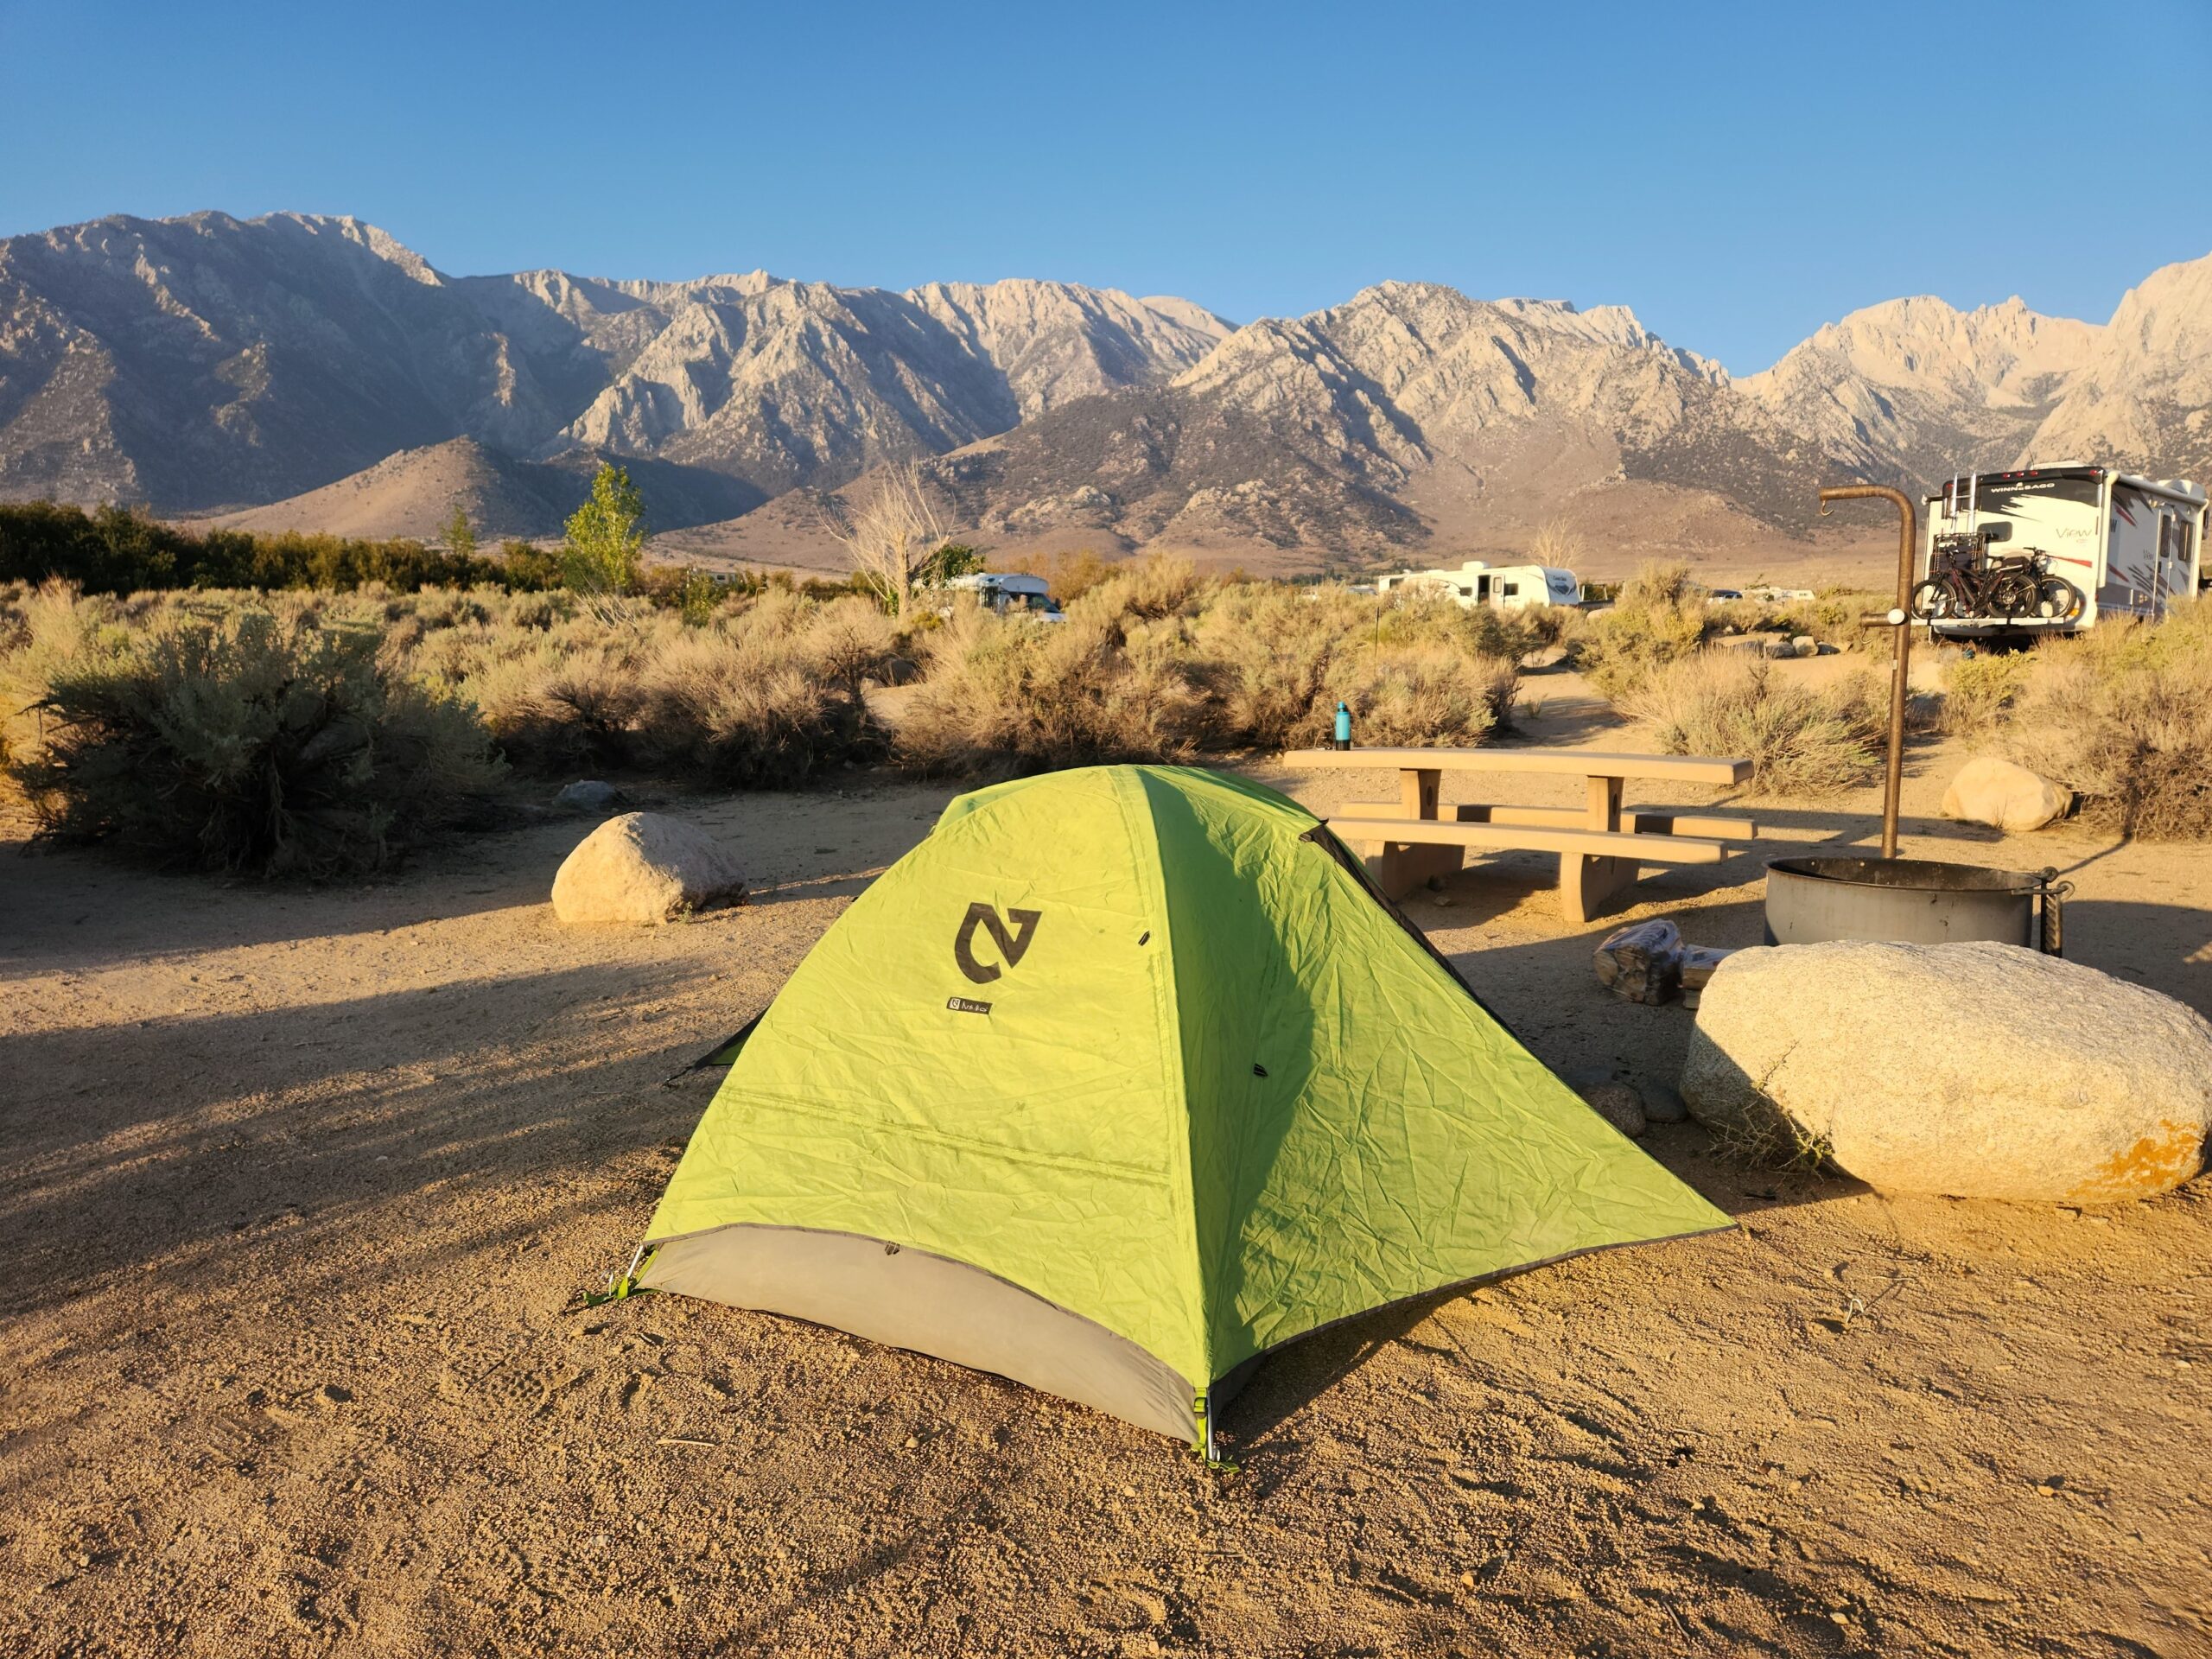 Camping tent in the Alabama Hills region, at the foothills of the Sierra Nevada mountain range in California. Camping